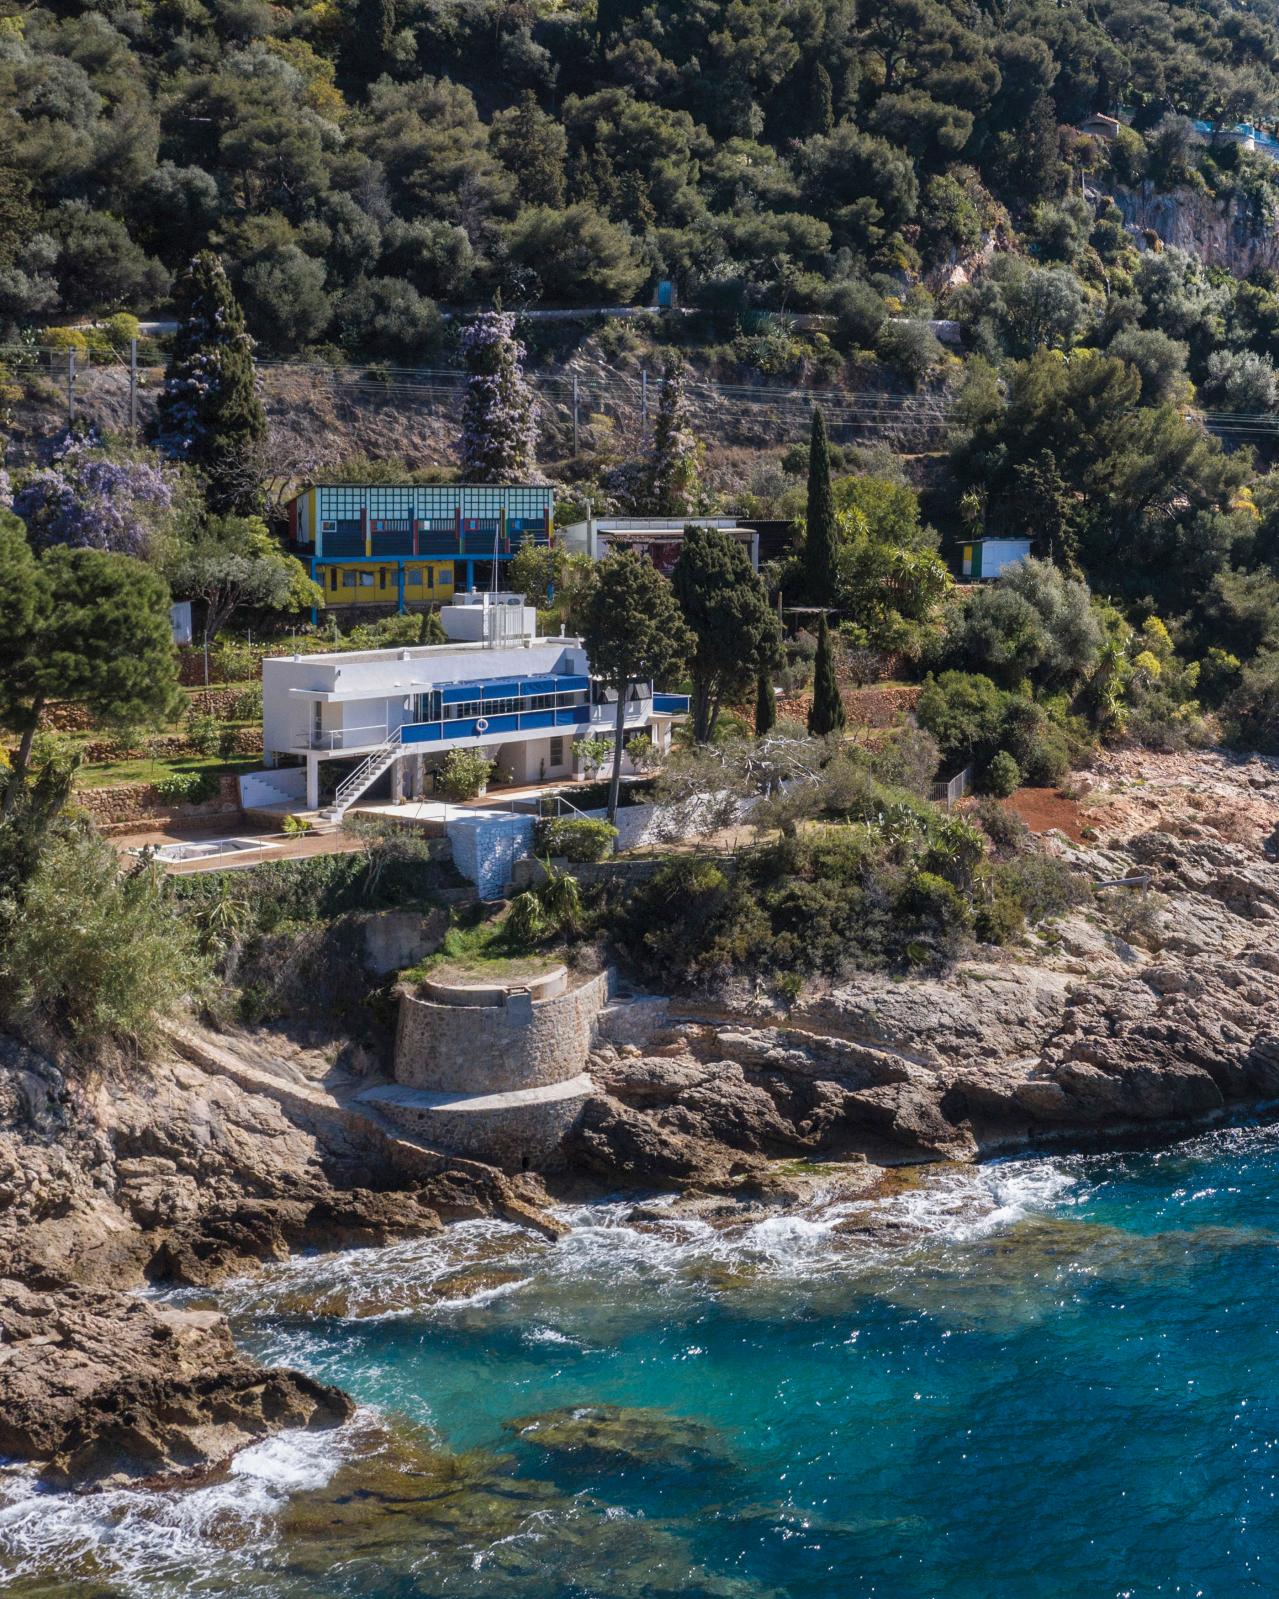 Villa E 1027: Eileen Gray's Masterpiece Rises from the Ashes